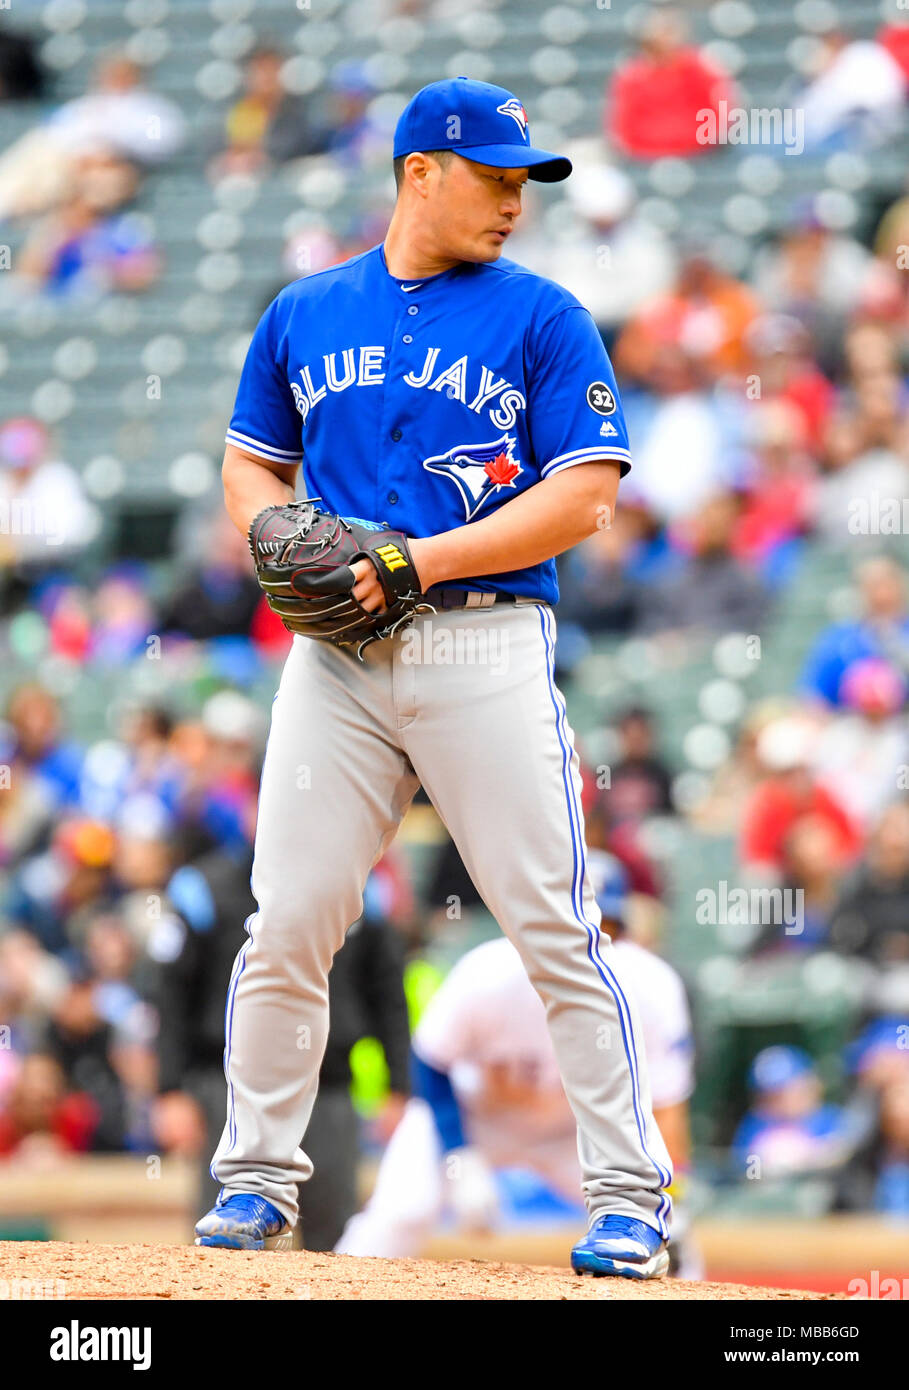 Apr 08, 2018: Toronto Blue Jays relief pitcher Seung Hwan Oh #22 during an  MLB game between the Toronto Blue Jays and the Texas Rangers at Globe Life  Park in Arlington, TX